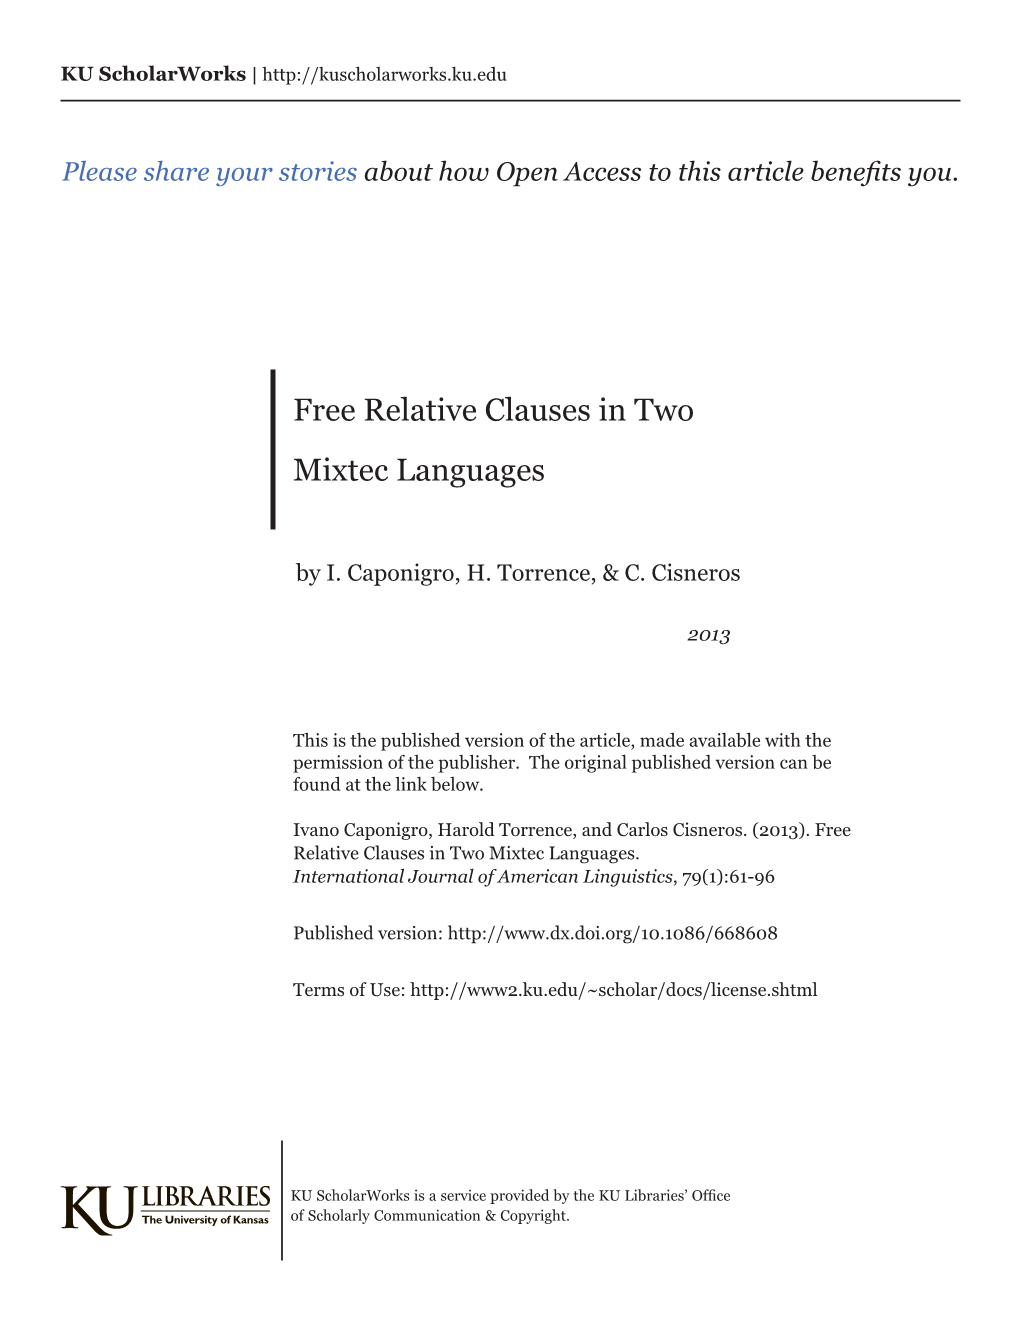 Free Relative Clauses in Two Mixtec Languages